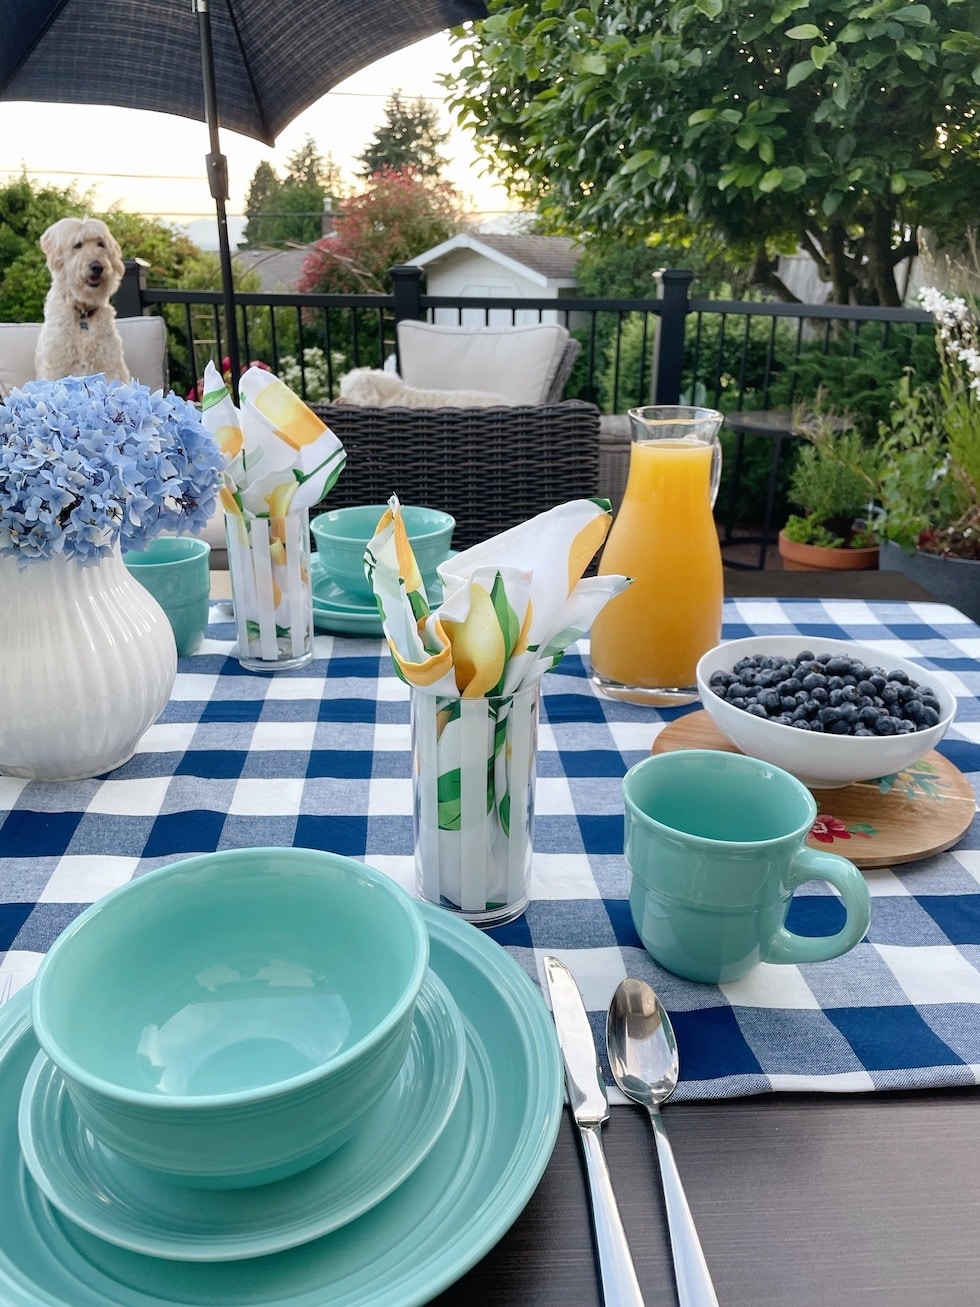 How to Set a Cheerful Summer Table